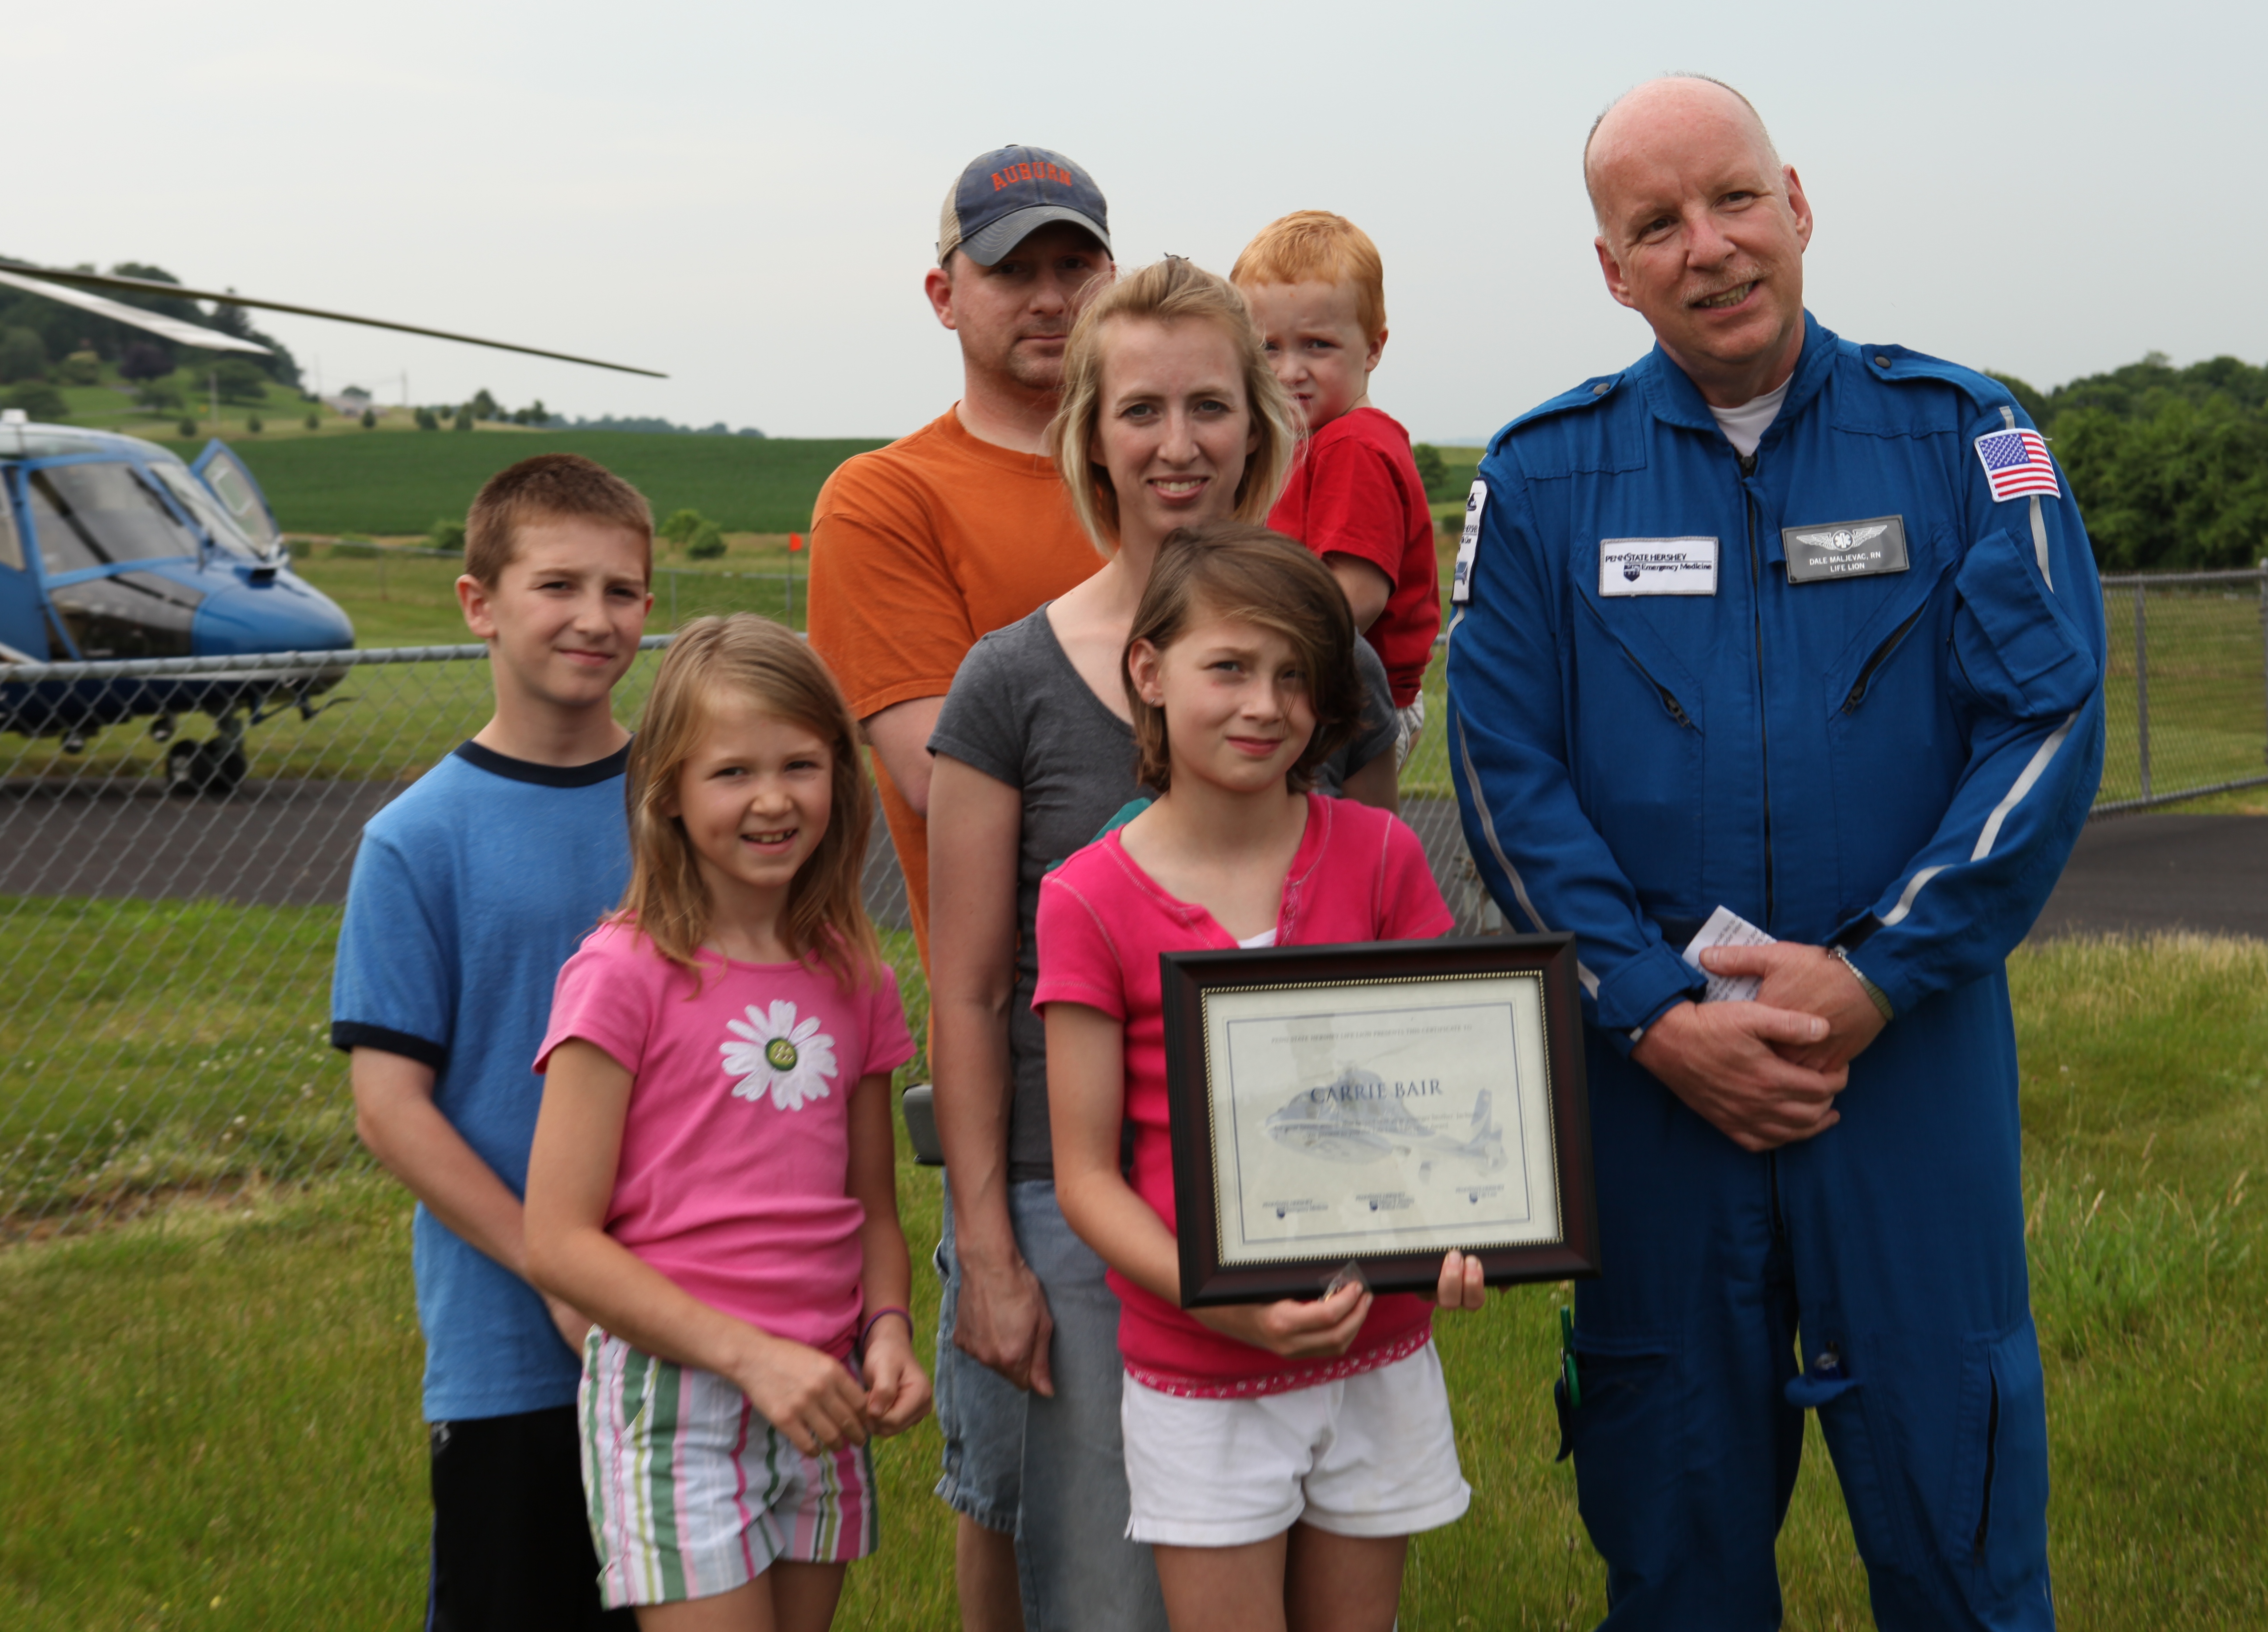 Carrie Bair (front, center) receives a Life Lion Life Saver Award from Dale Maljevac, flight nurse with Penn State Hershey Life Lion Critical Care Transport. Standing behind Carrie are her mom, Amy, and dad, Jason. Jason is holding Carries brother, Jackson. At left are their siblings, Jared and Caeley.